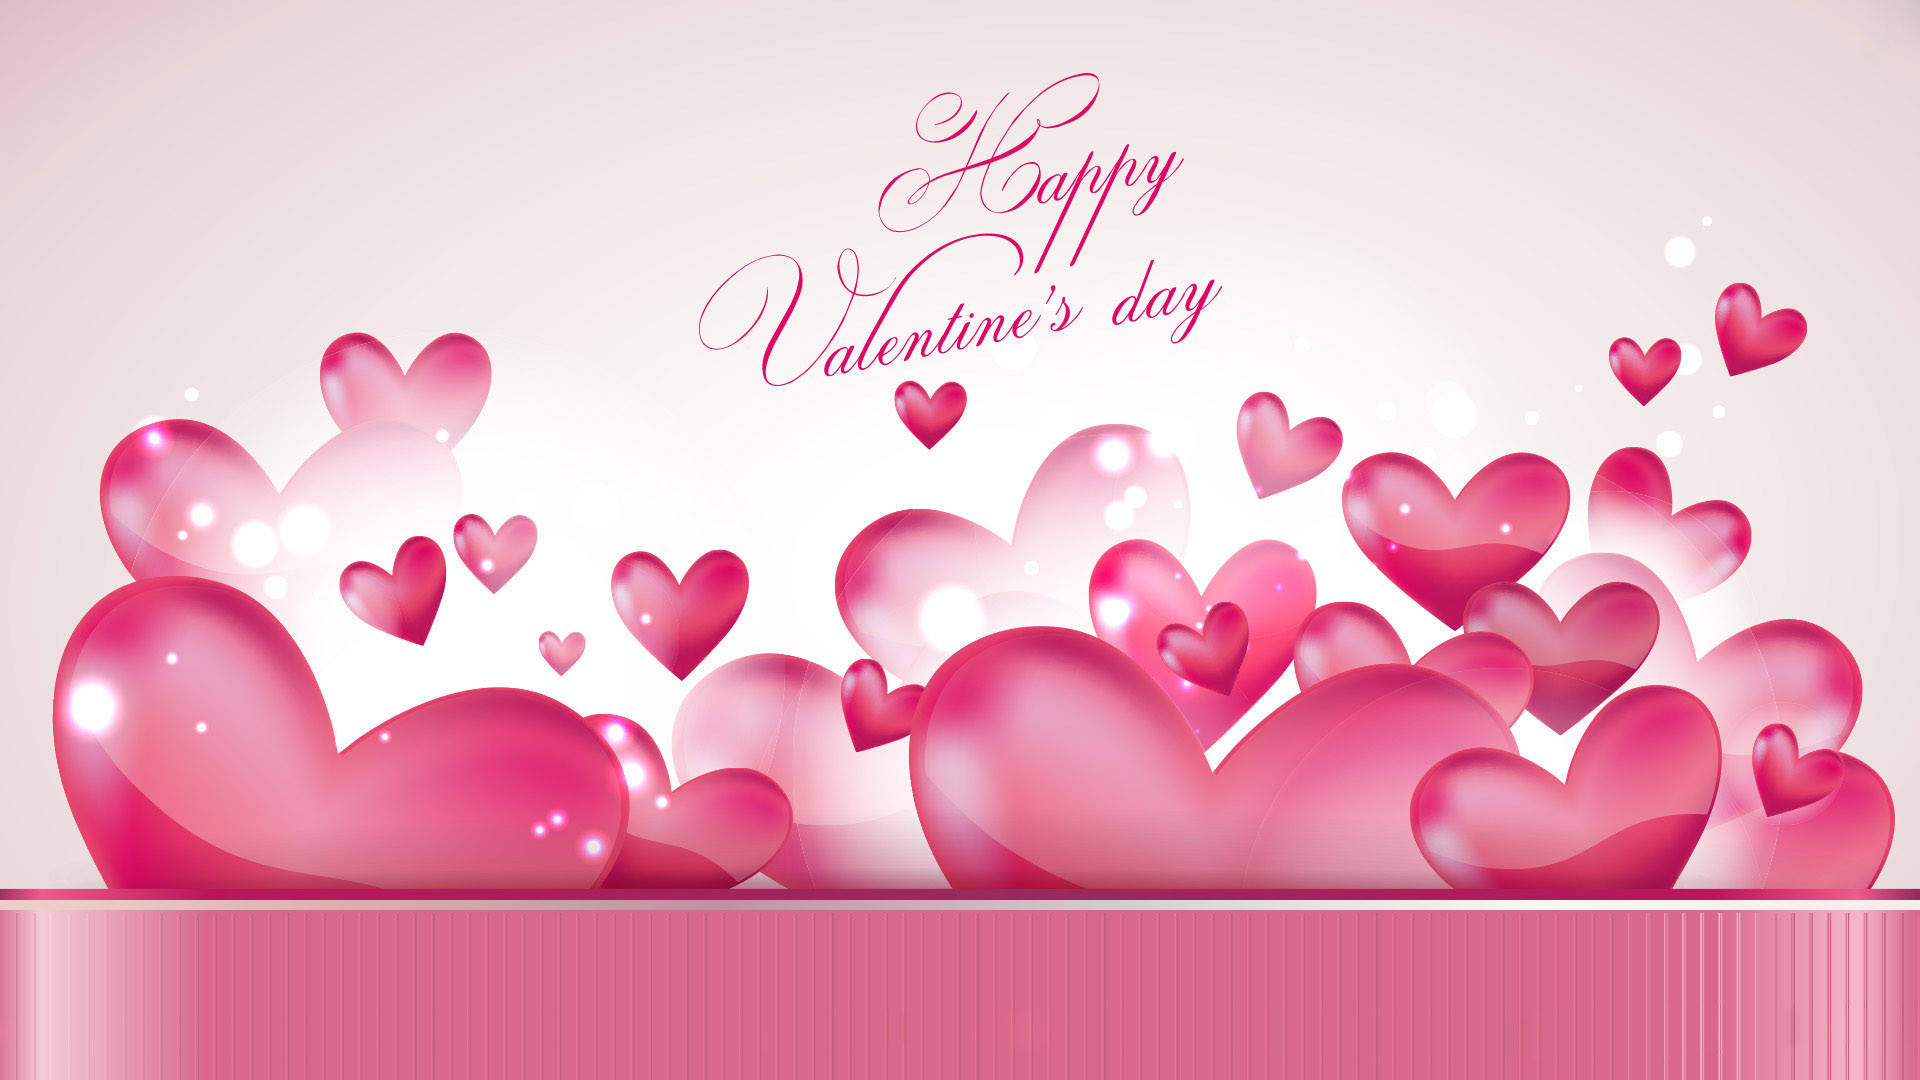 Happy Valentine’s Day Pink Floating Hearts Wallpaper